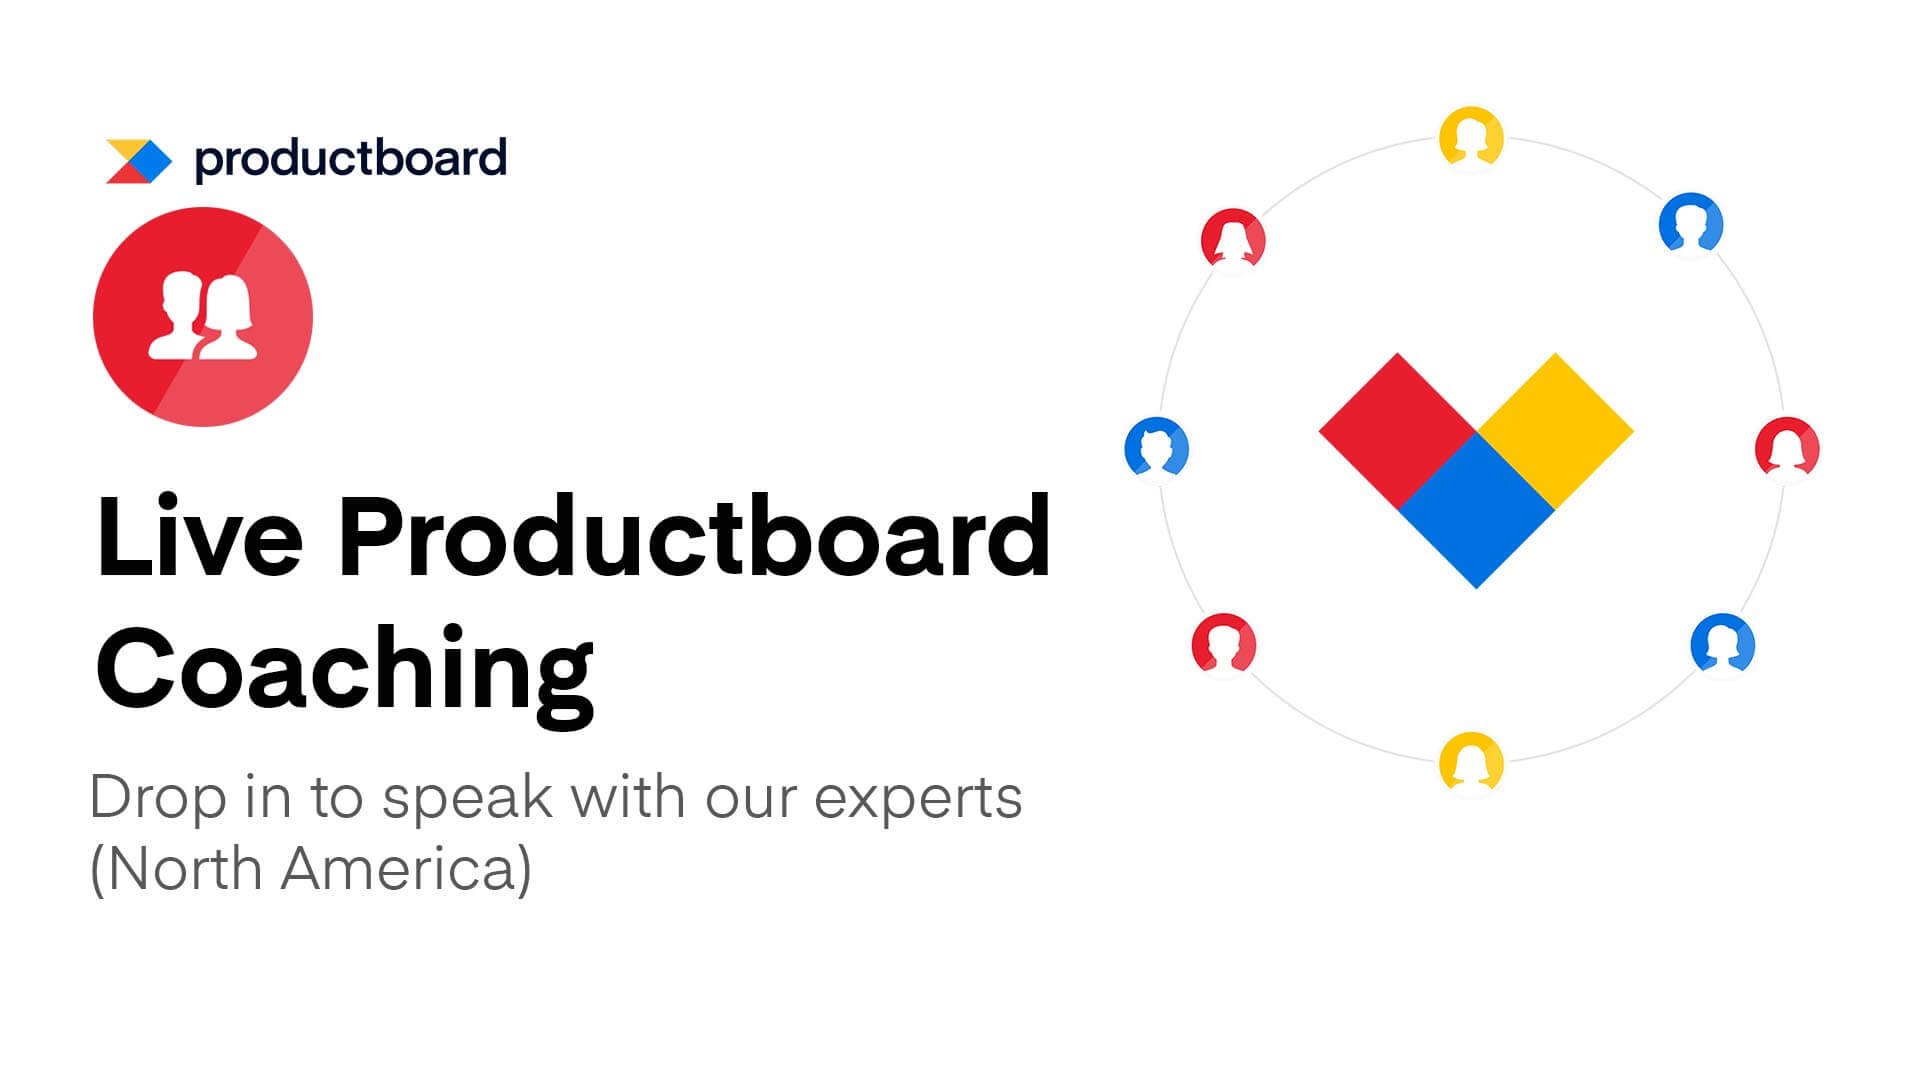 2/24 Live Productboard Coaching (North America)